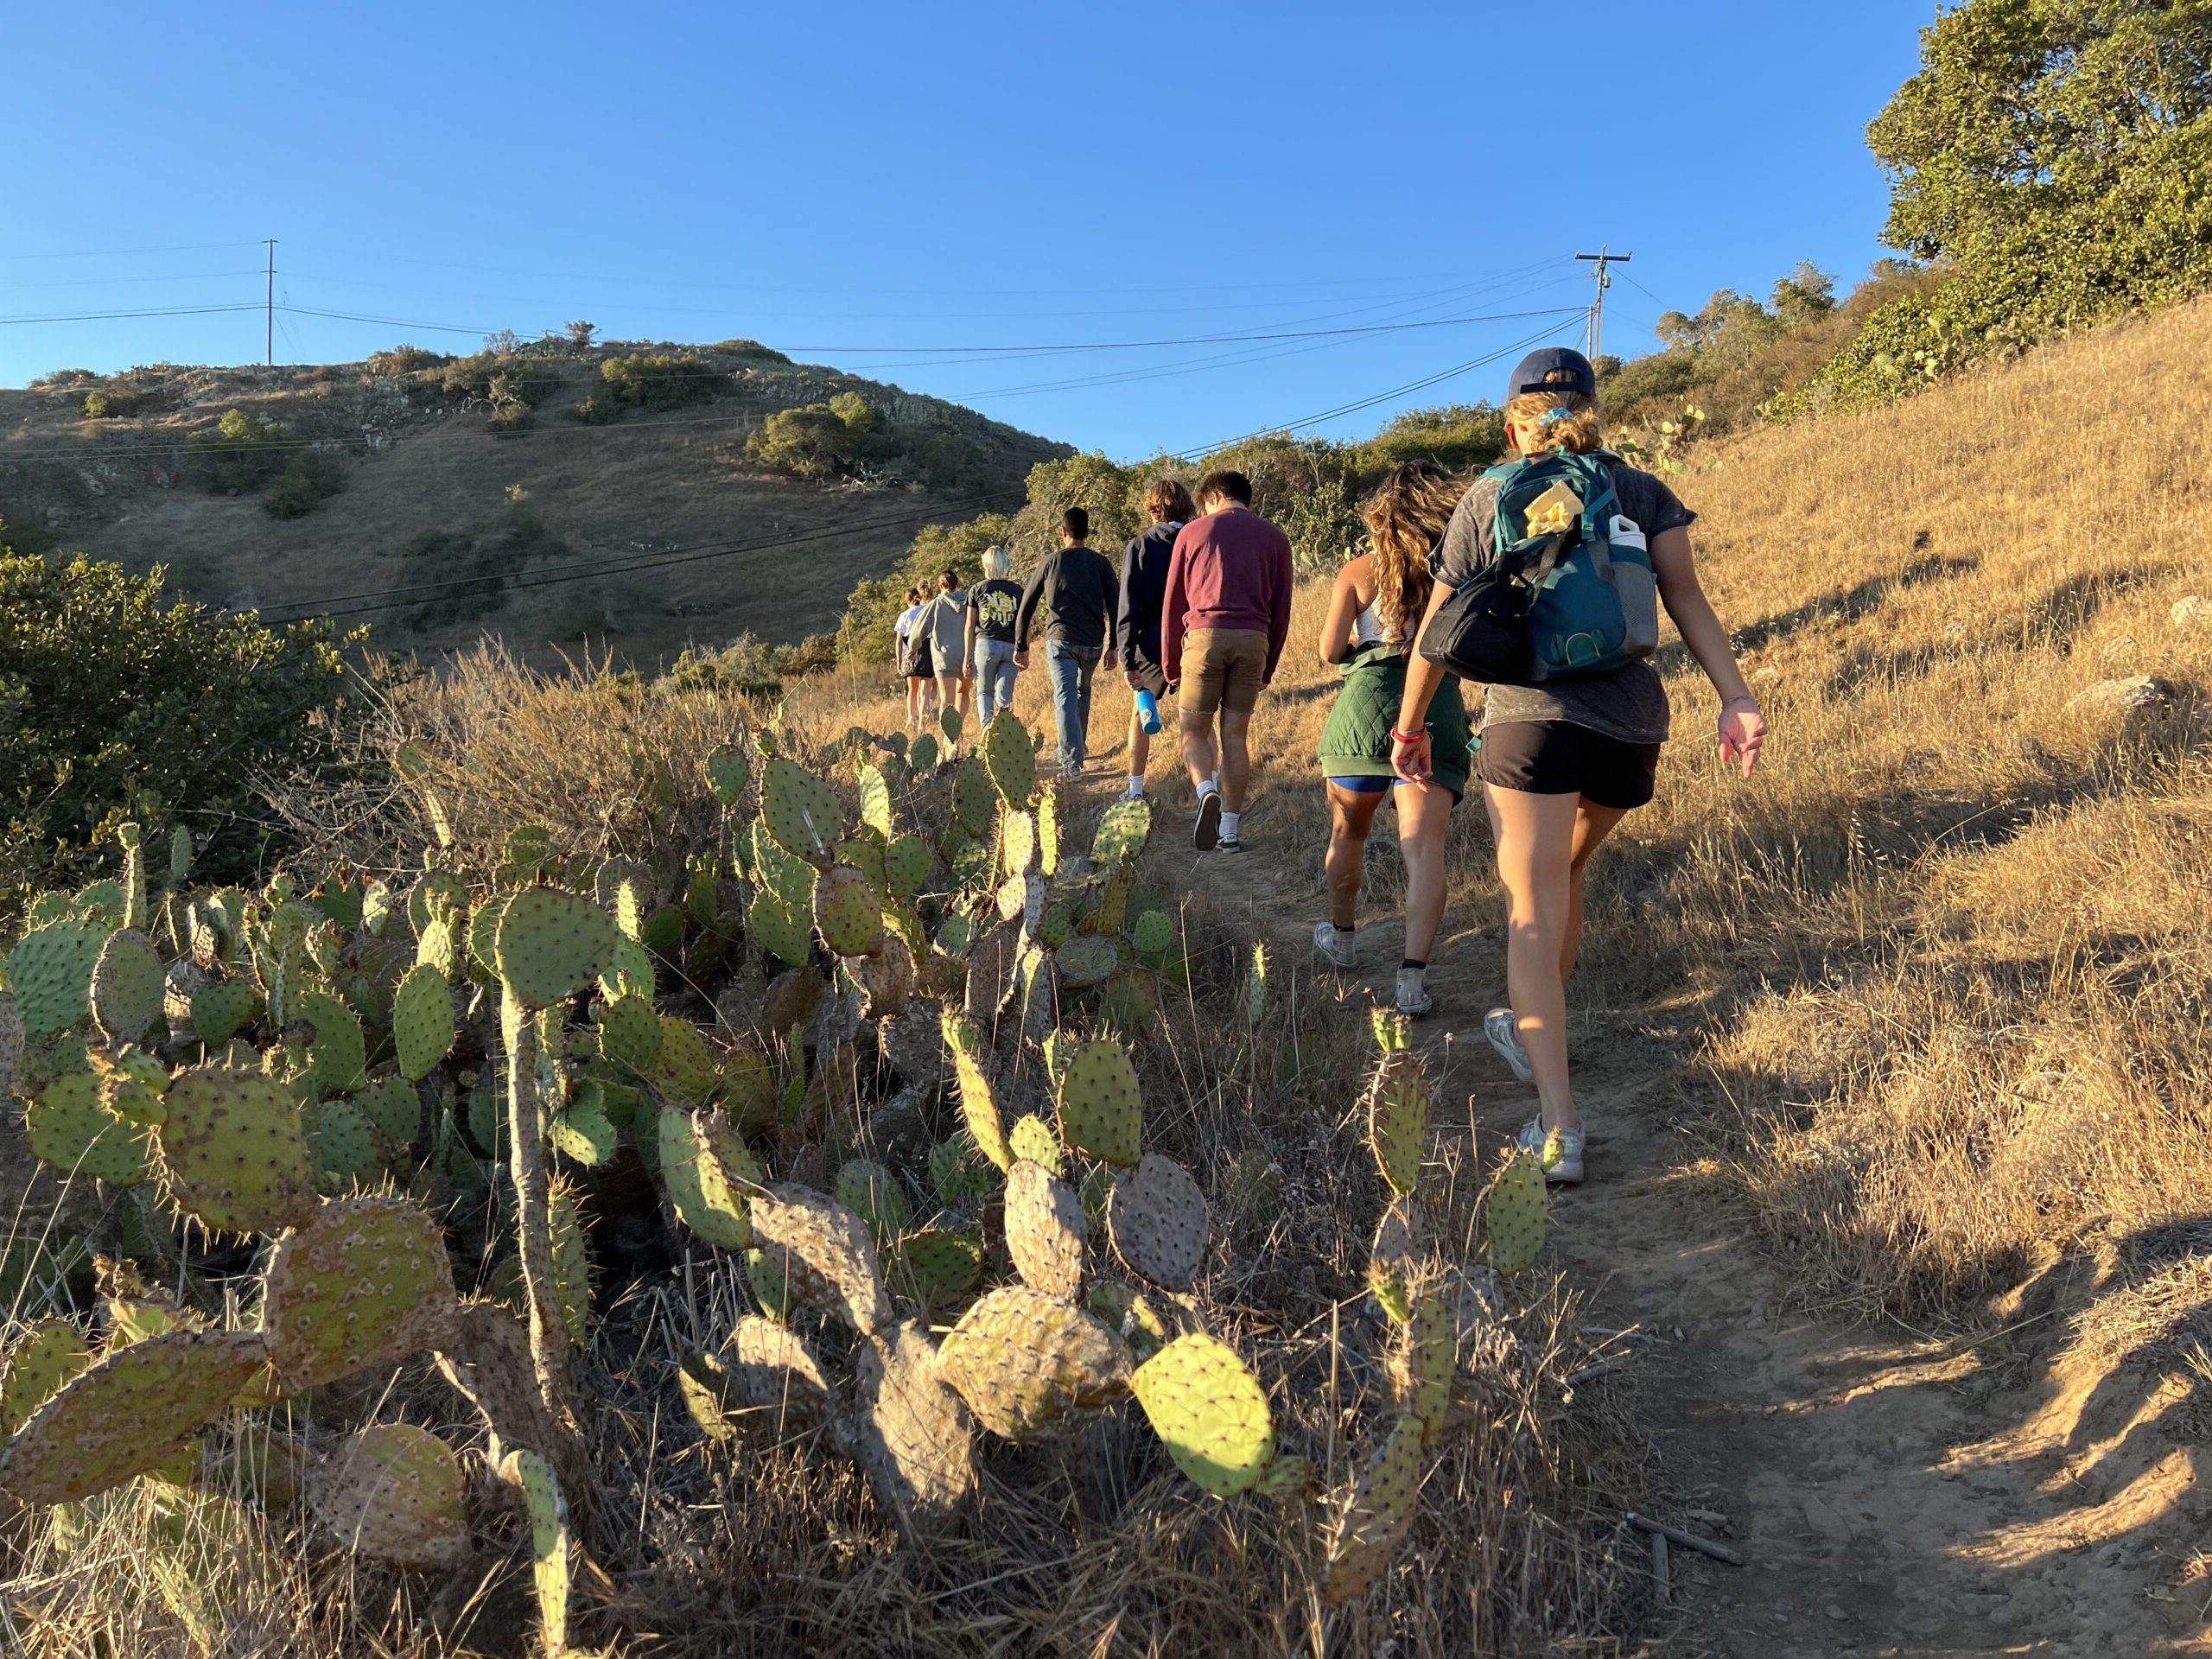 a line of students walks along a dirt hiking trail toward a hill with prickly pear cactus on their left